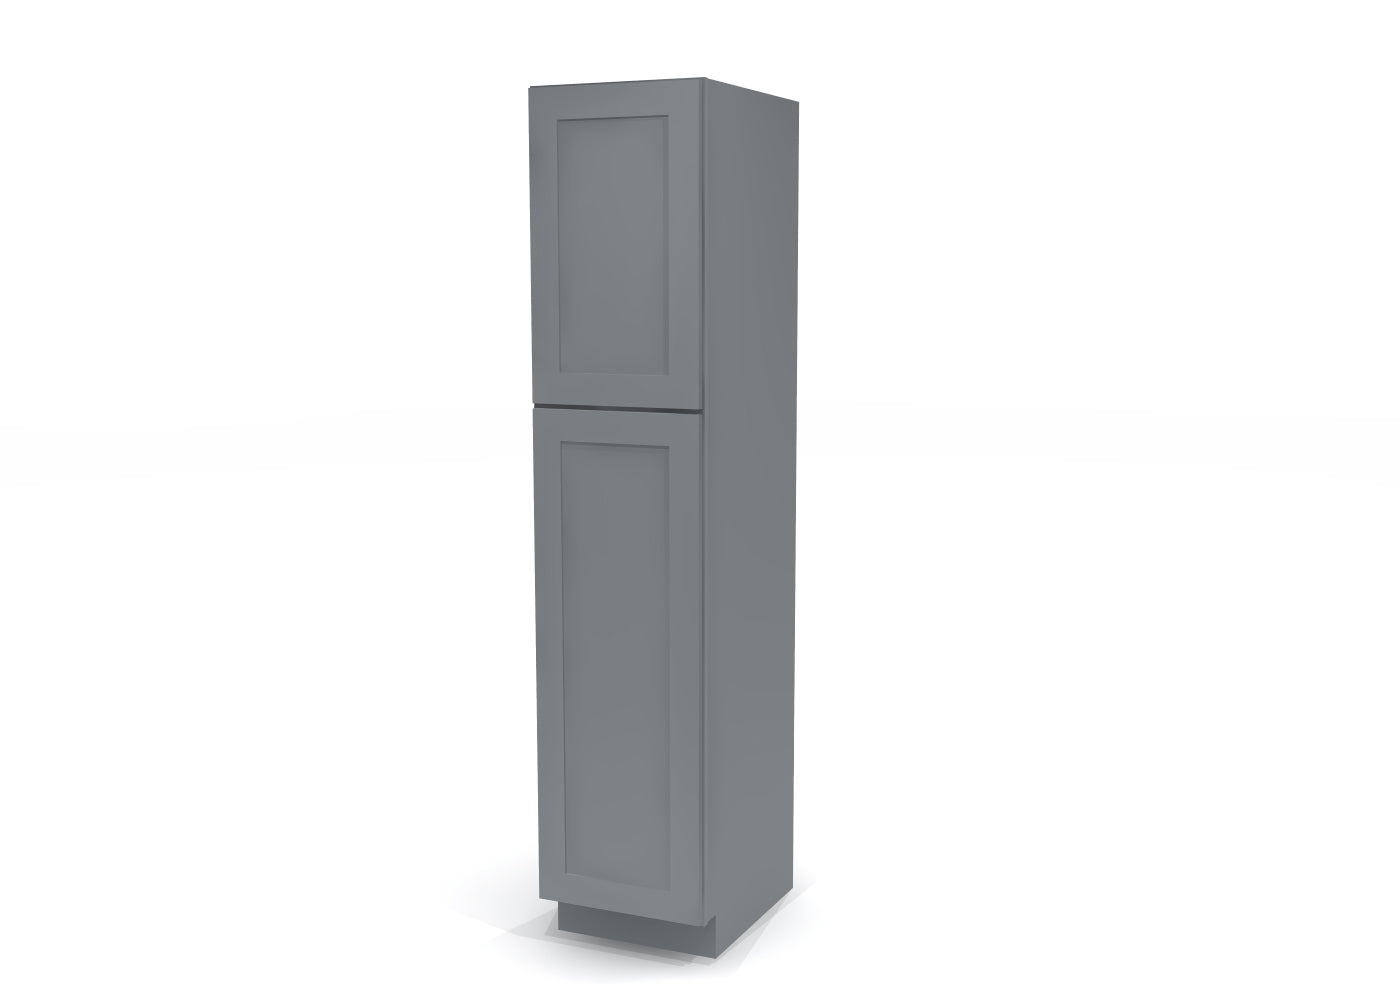 Utility Pantry Single Door 84" by 18" Wide Gray Shaker Cabinet